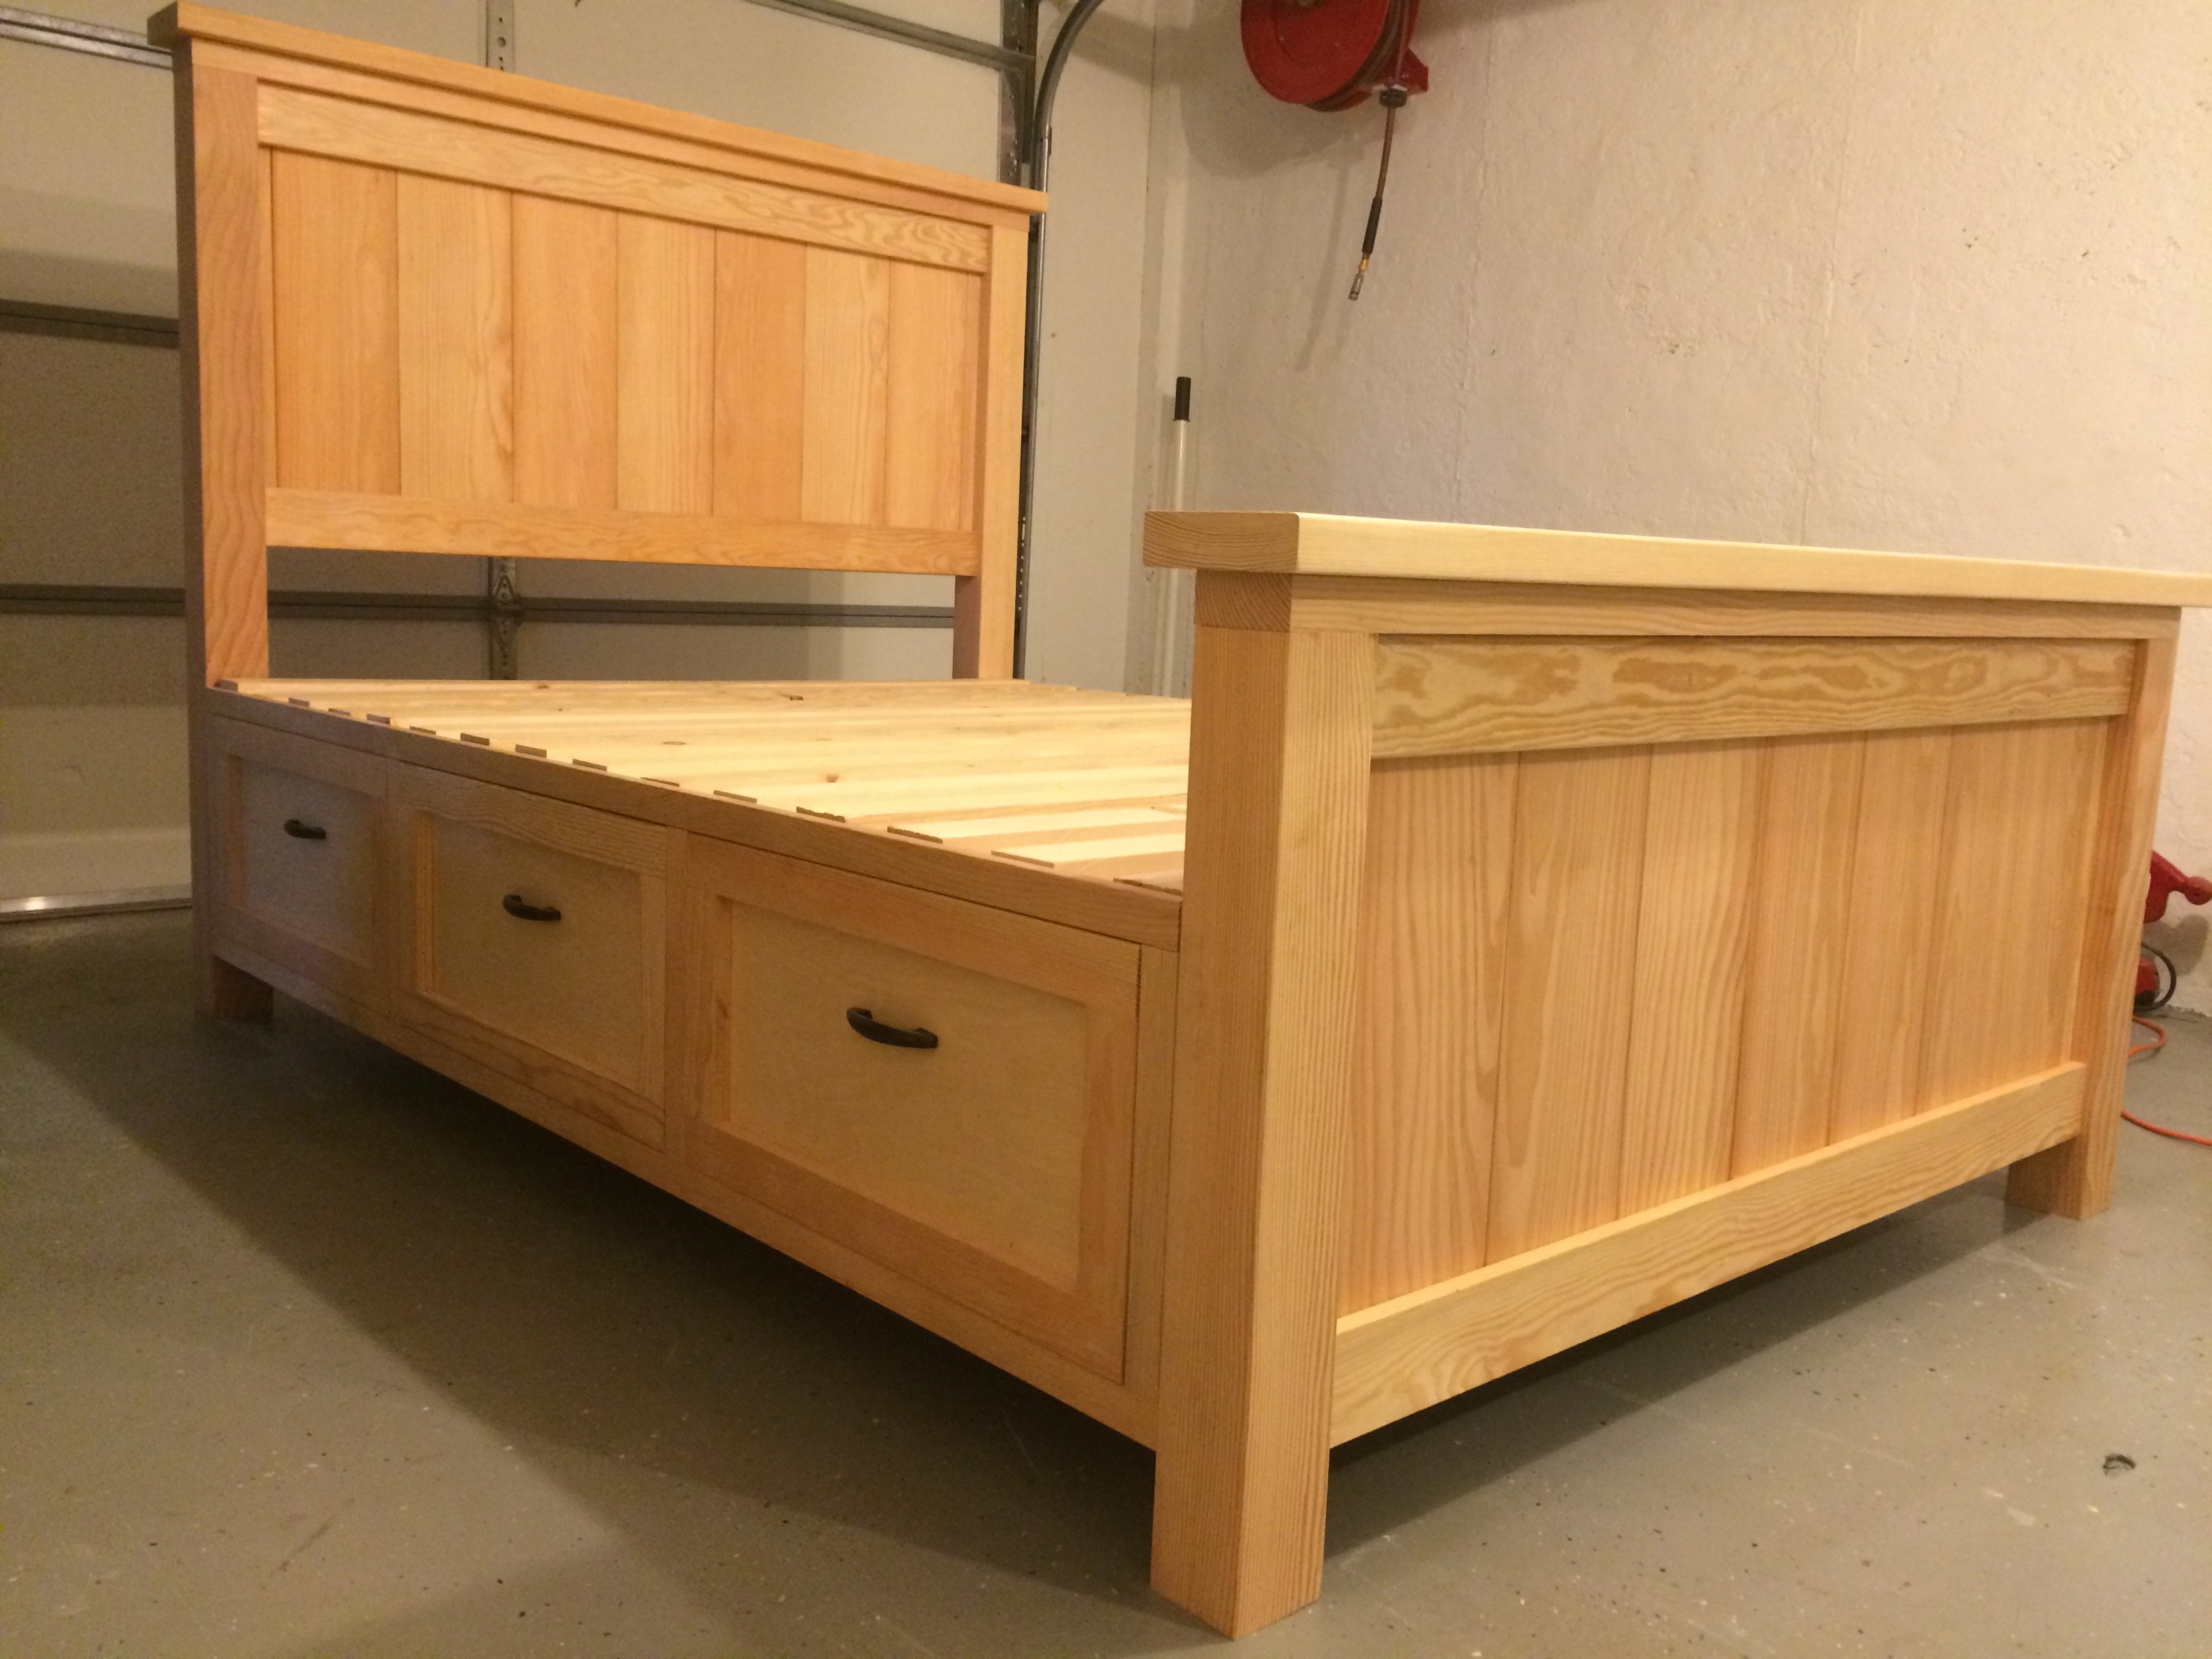 Farmhouse Storage Bed With Drawers, Storage Bed Frame Queen Diy